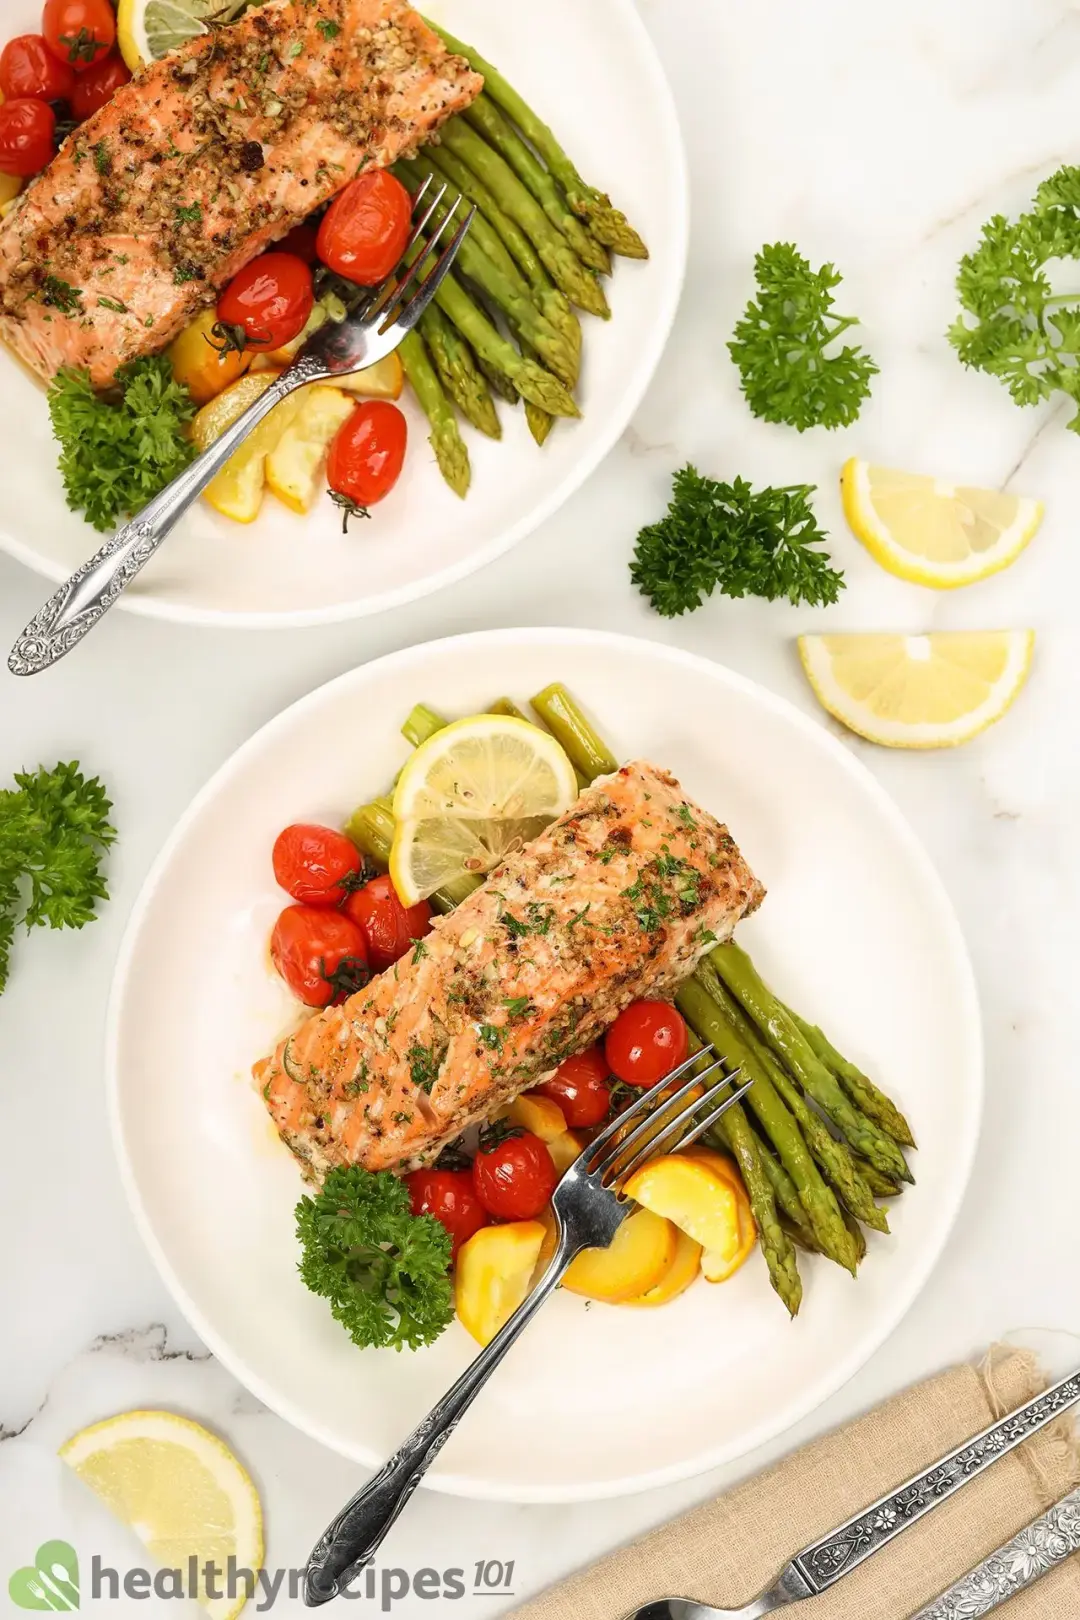  Two plates of baked salmon in foil with silver dining utensils surrounded by some fresh parsley and slices of lemon